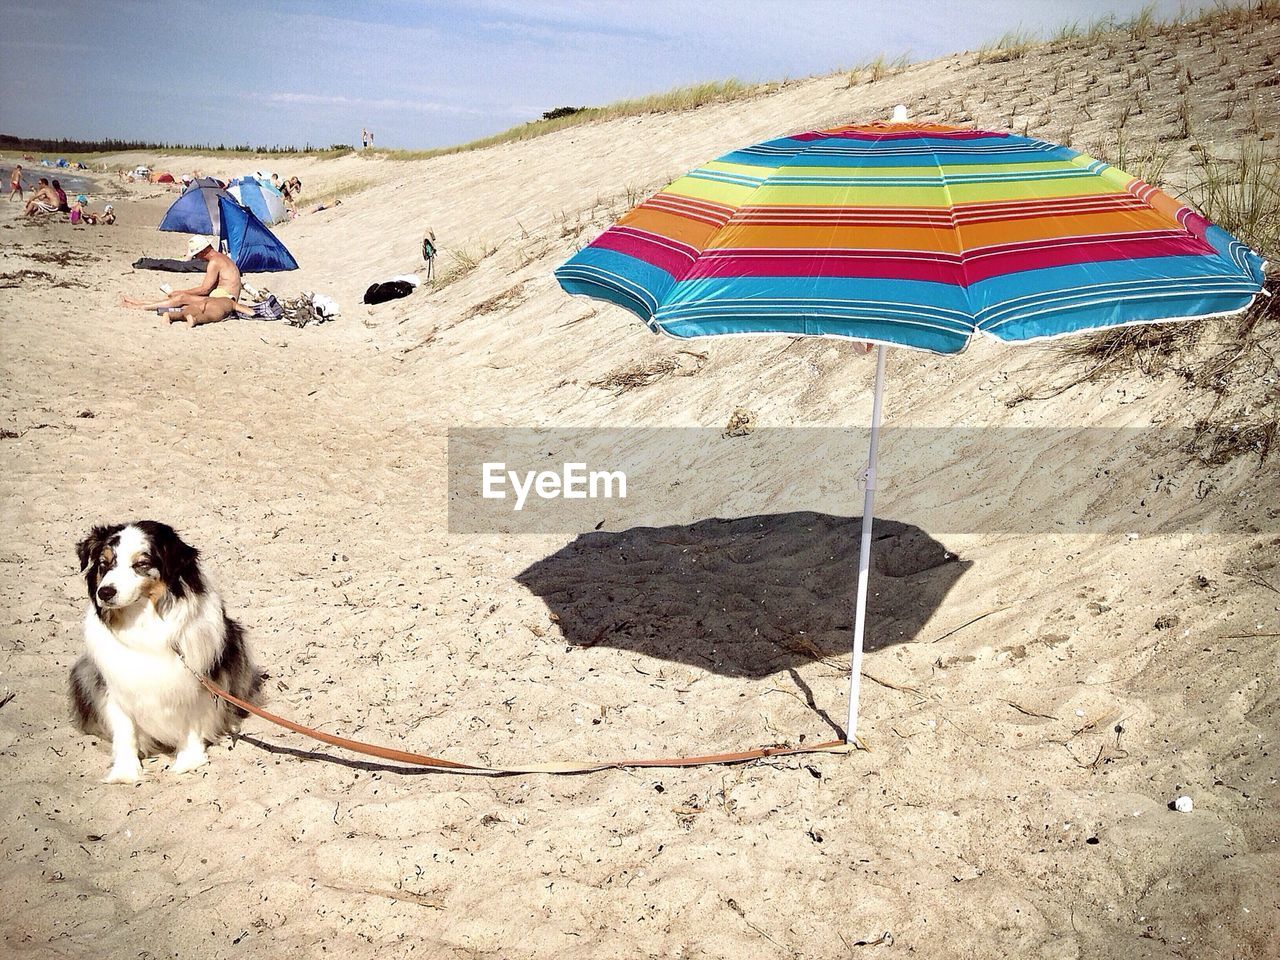 Dog tied to the umbrella at beach